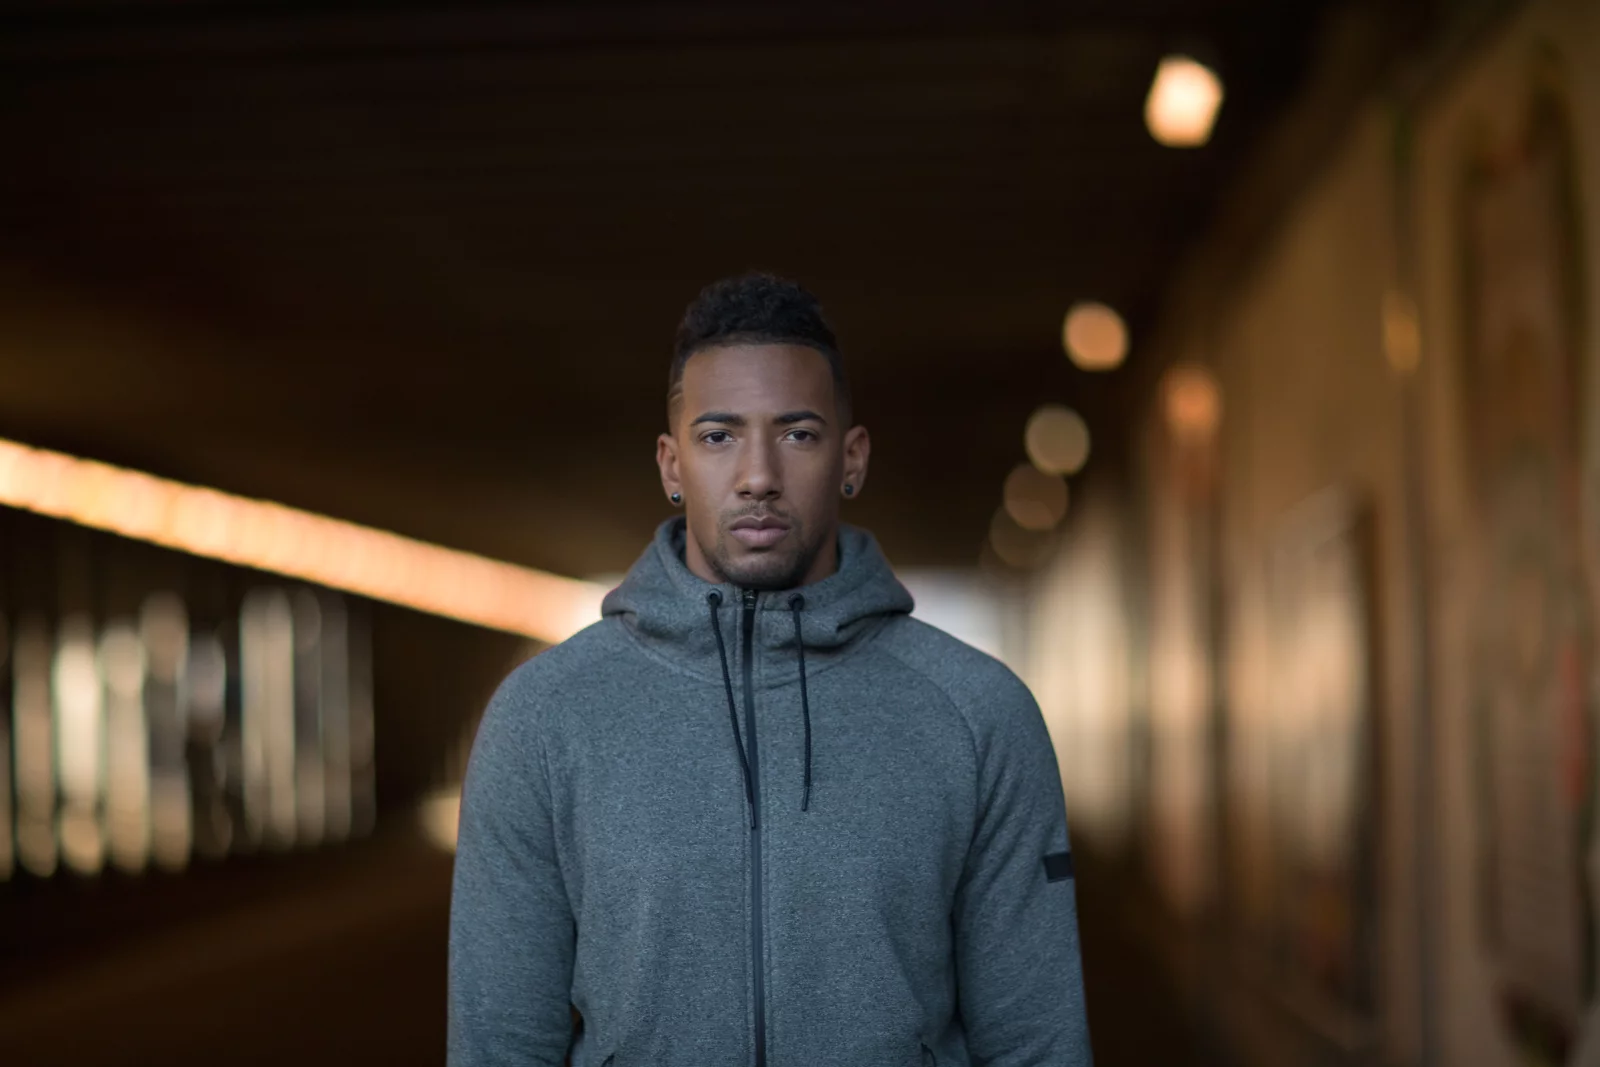 Jerome Boateng for Nike 1 by Marcus GAAB